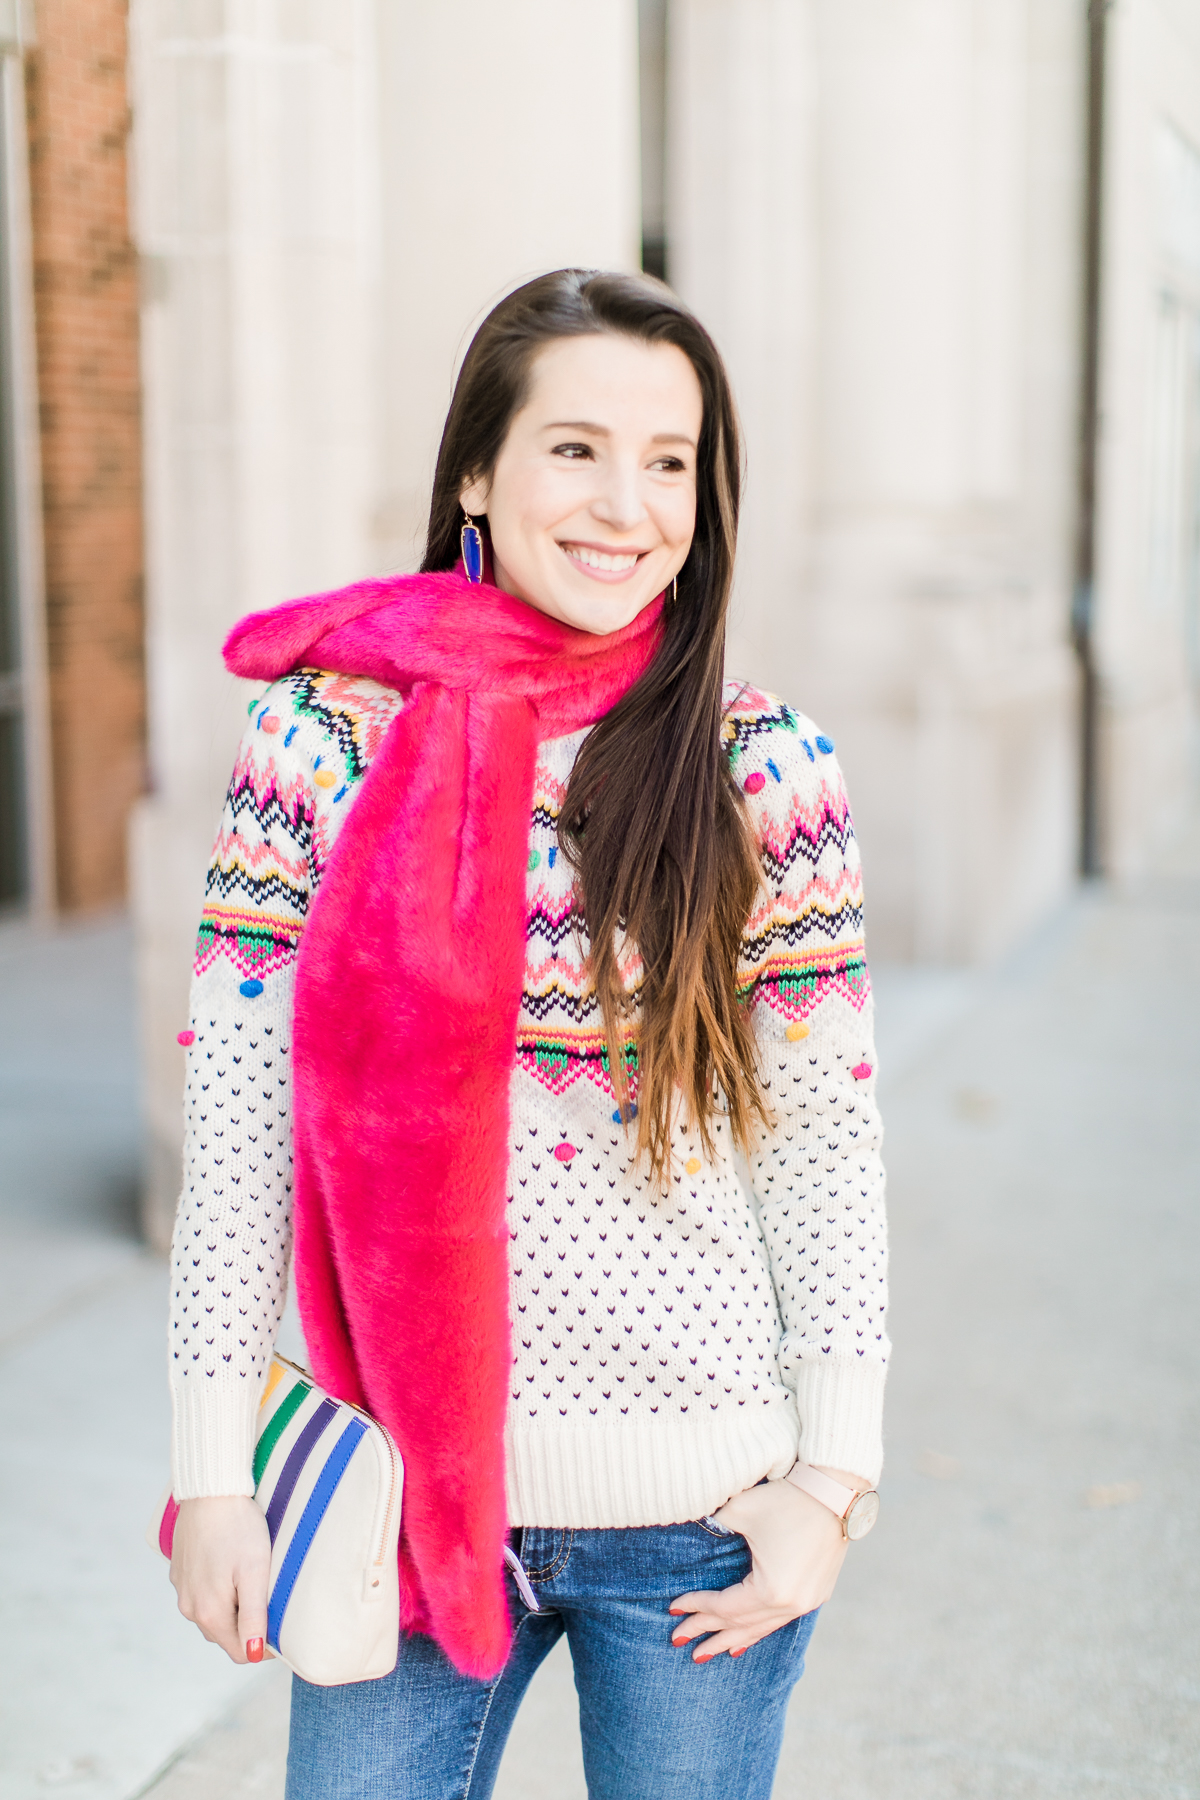 Colorful Christmas sweater ideas from Talbots, featuring their Carnival Fair Isle Sweater, Pink Faux Fur Pull Through Scarf, and Canvas Stripe Makeup Pouch styled with AG the Legging ankle jeans, taupe Free People Liberty boots, and cognac Kendra Scott Skylar earrings by southern fashion blogger Stephanie Ziajka from Diary of a Debutante